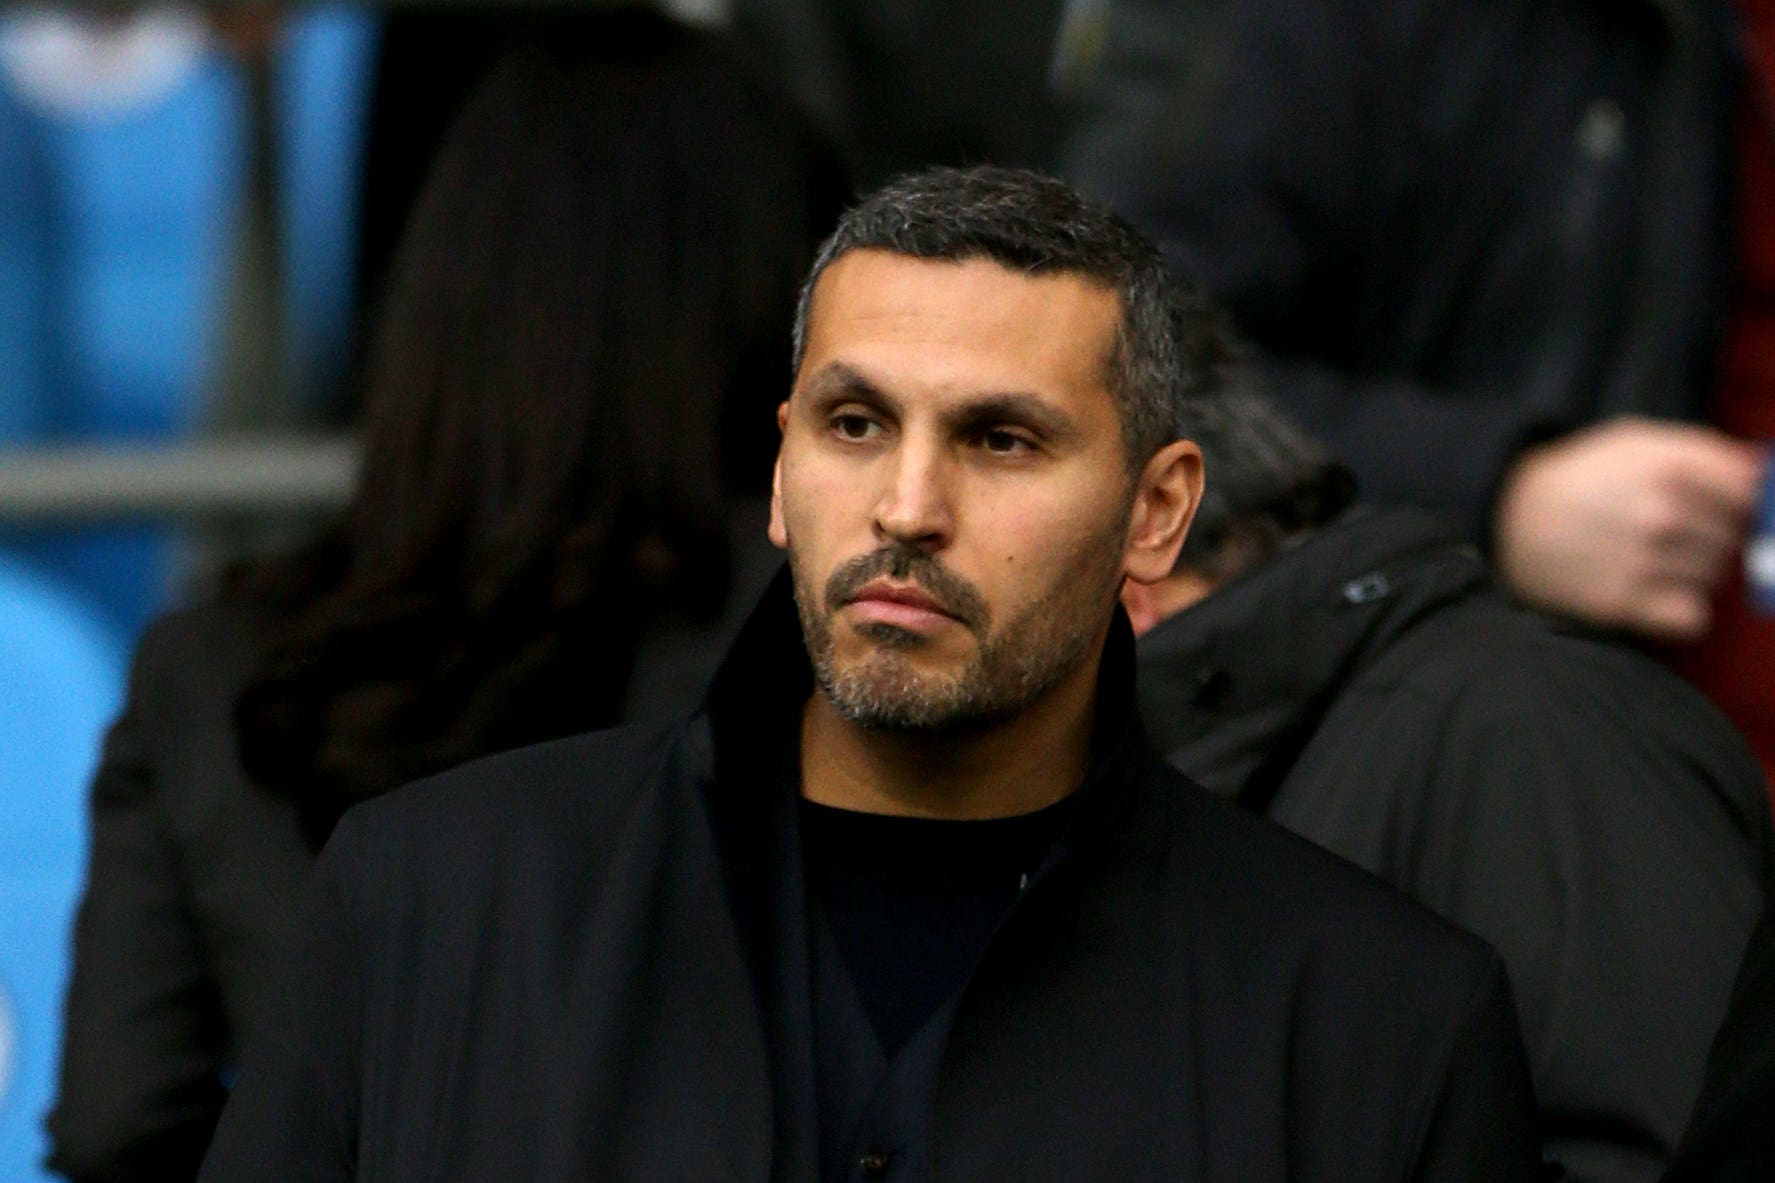 Manchester City chairman Khaldoon Al Mubarak is frustrated by the length of the case involving 115 Premier League allegations